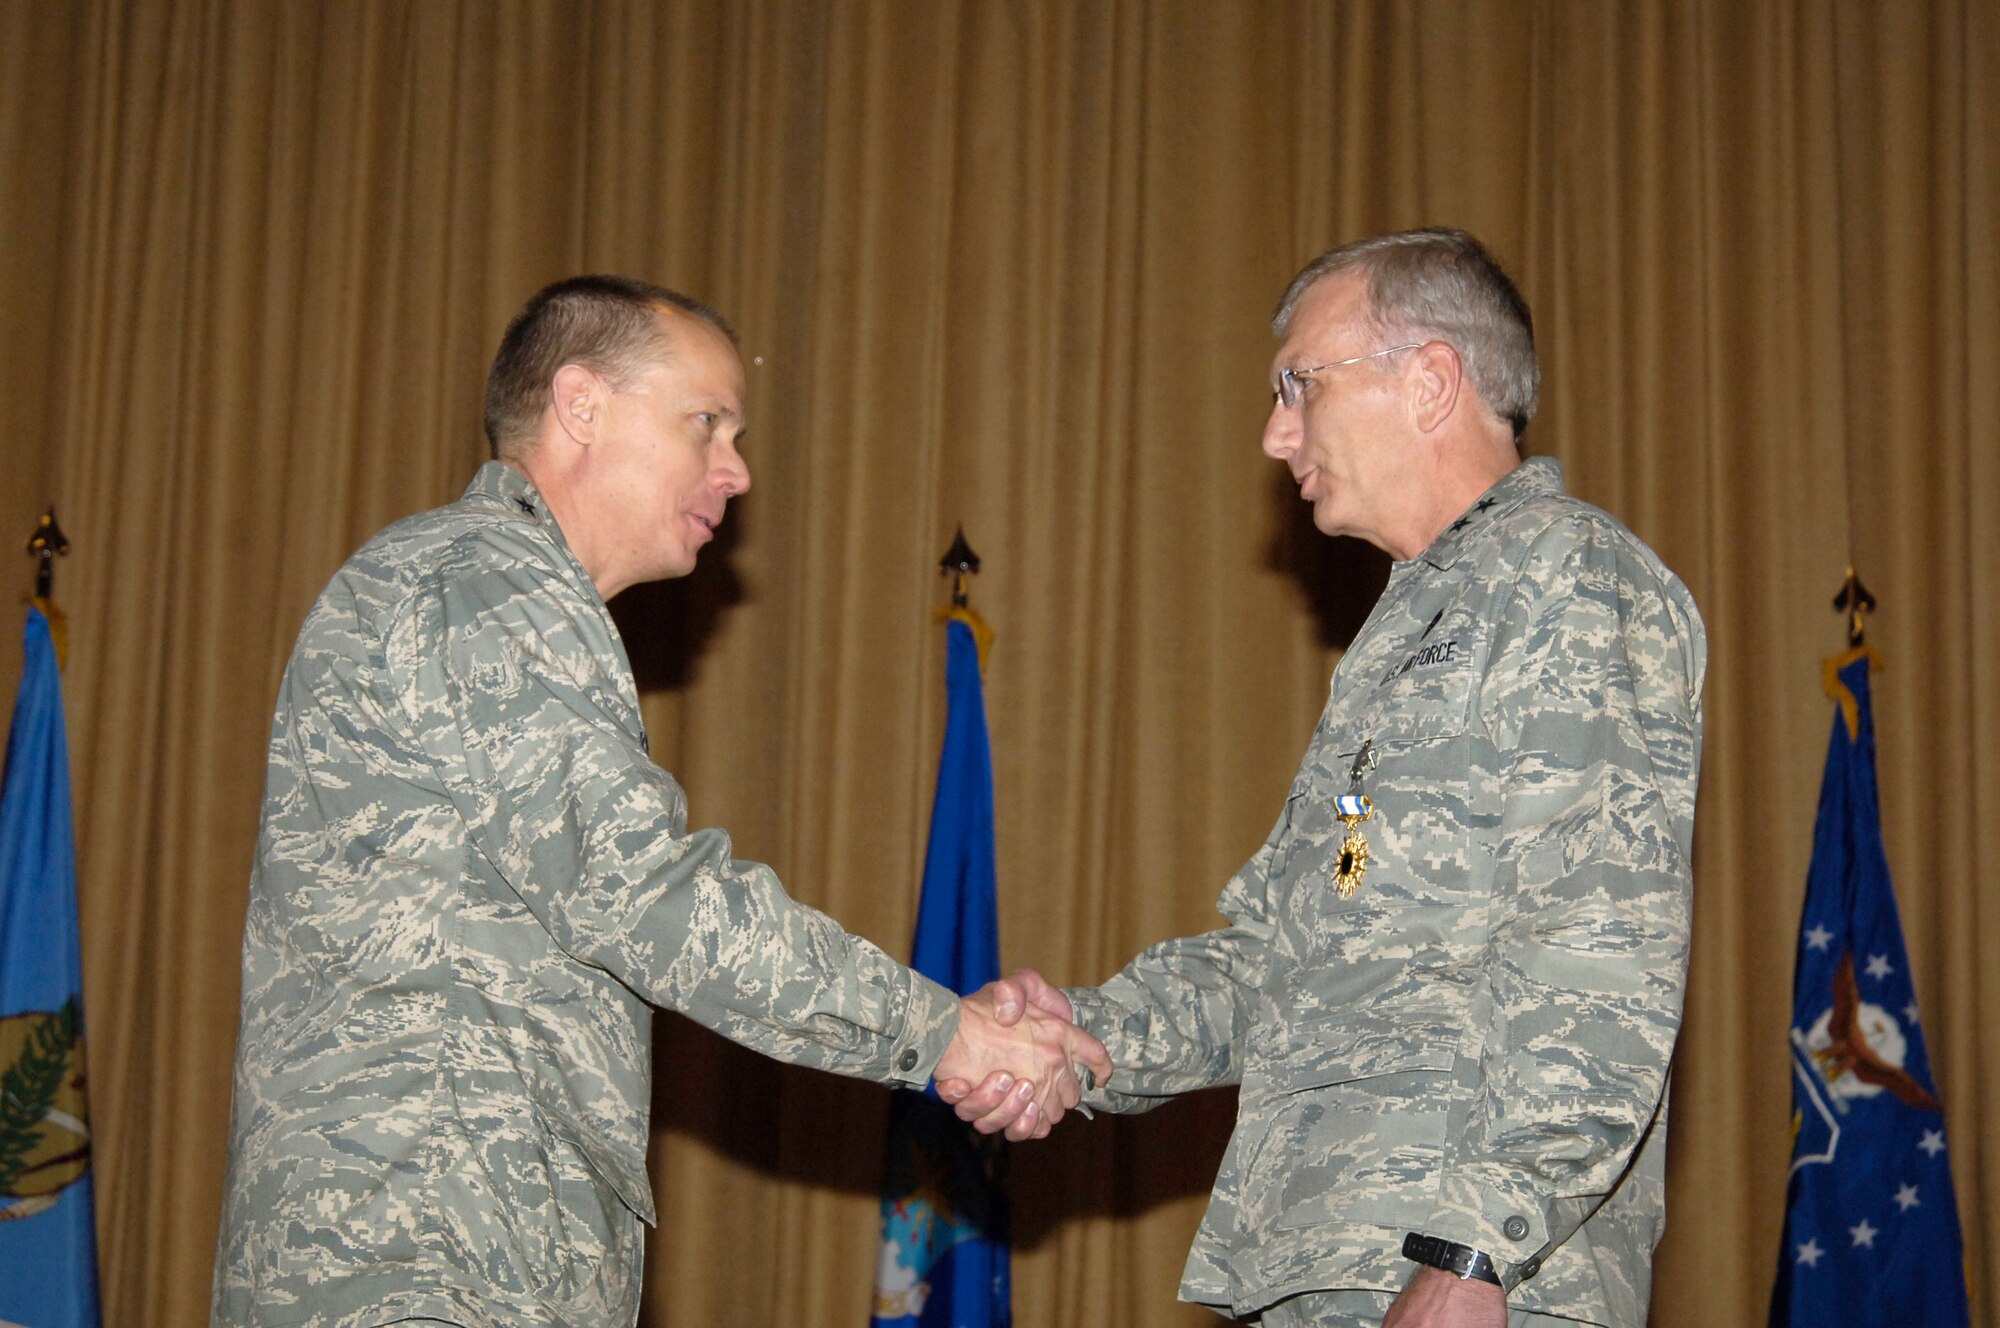 Gen. Donald Hoffman, commander of the Air Force Materiel Command, held a town hall meeting at Tinker March 13. The general discussed his priorities for the command and spoke of properly recognizing outstanding performers. He then surprised Oklahoma City Air Logistics Center Commander Maj. Gen. P. David Gillett Jr., right, with the Distinguished Service Medal. (Air Force photo/Margo Wright)